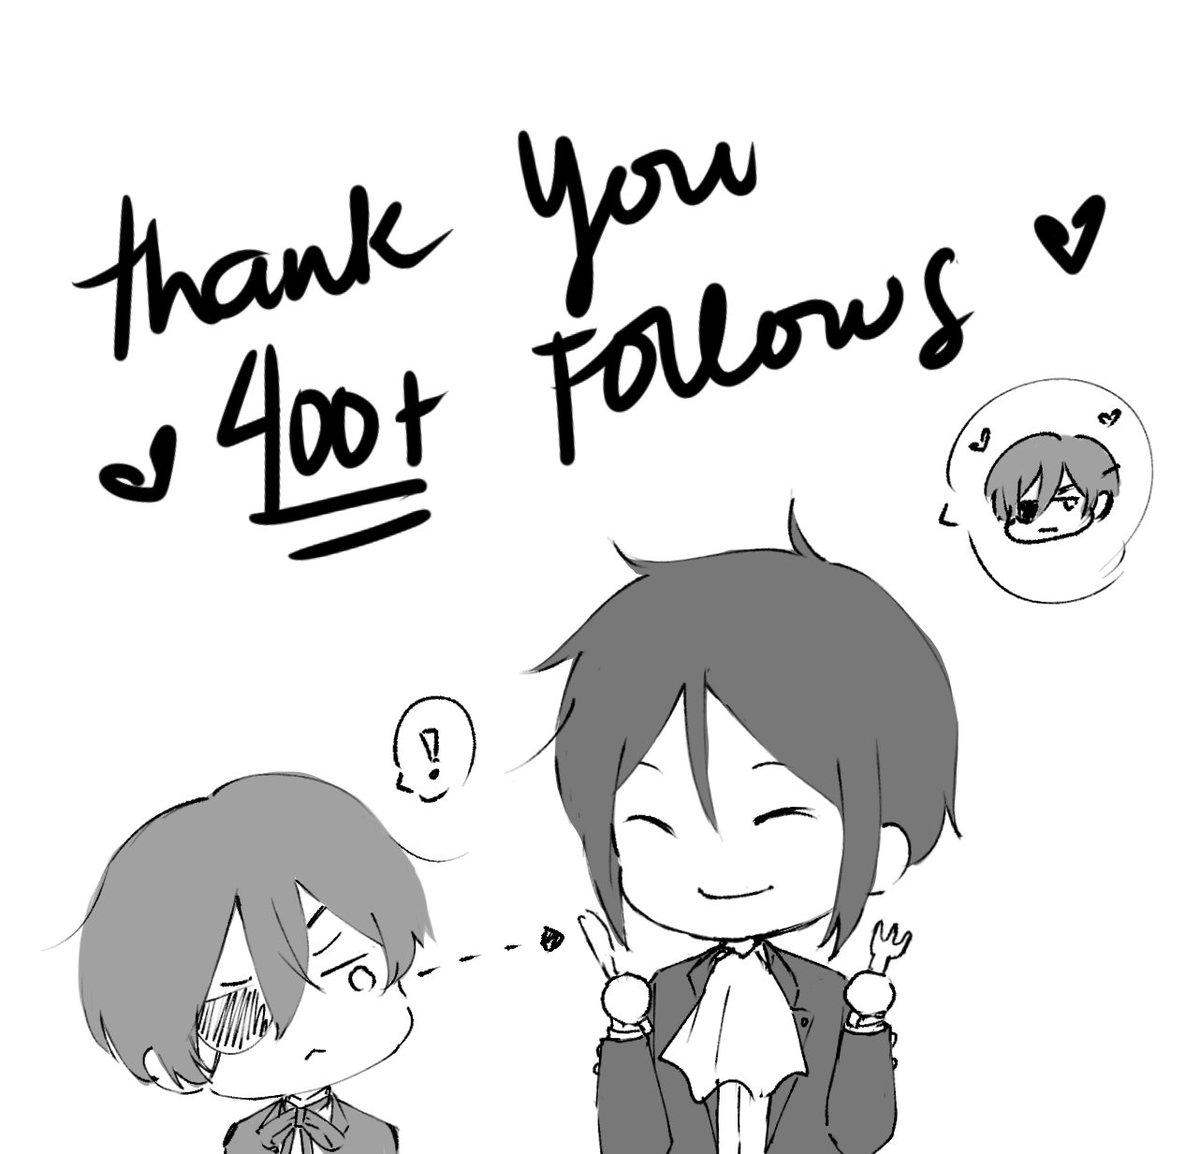 I recently got 400+ followers!! Thank you!! I started my account last month and I'm very happy that people like my art!!!! I will work harder 🙏 🙇‍♀️ 